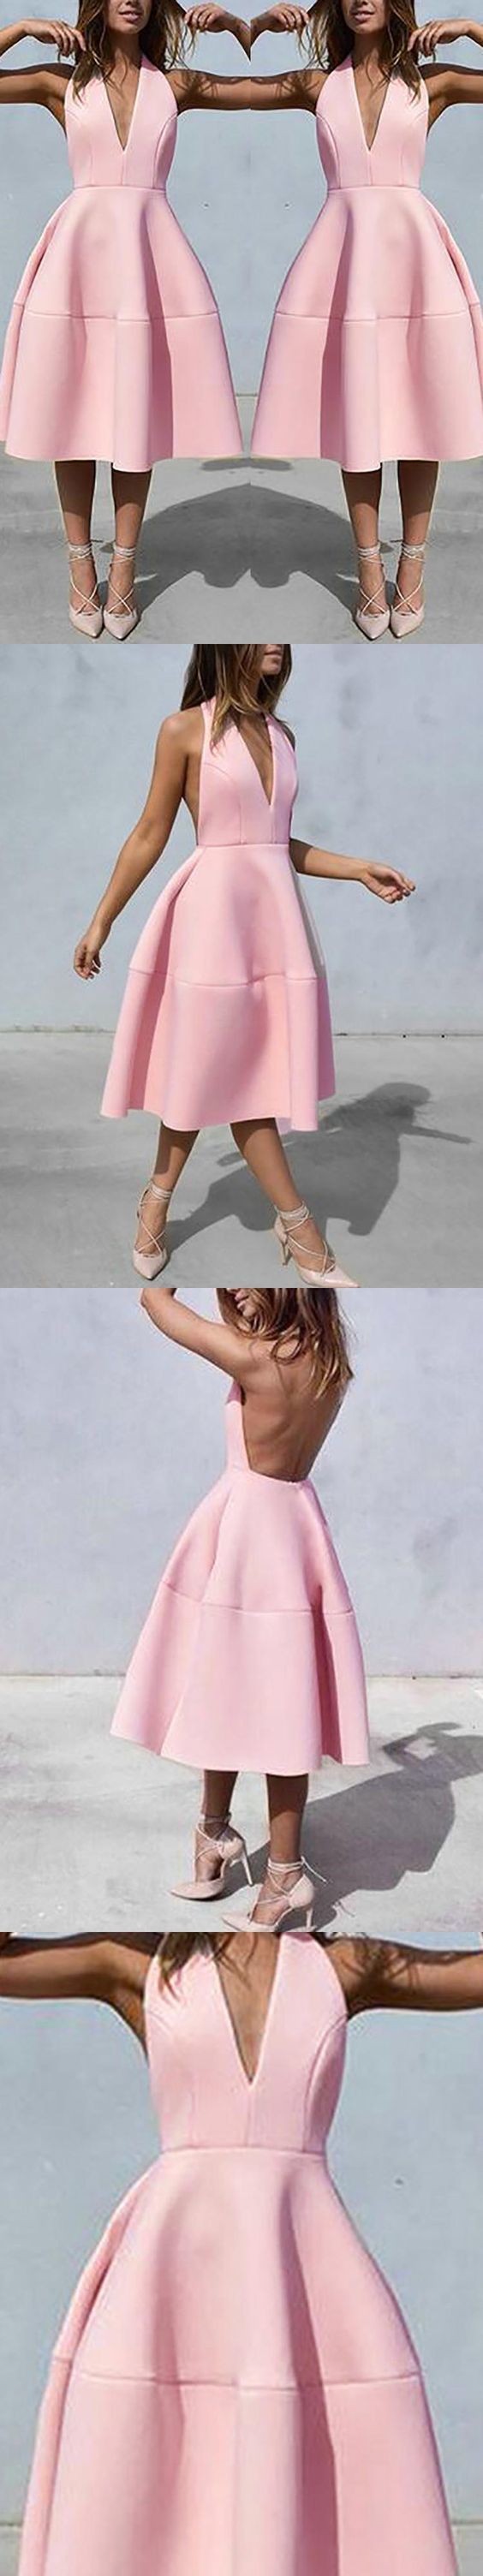 Open Back Pink Homecoming Dresses Simple Fashion Short homecoming Dress Party Dress cg786